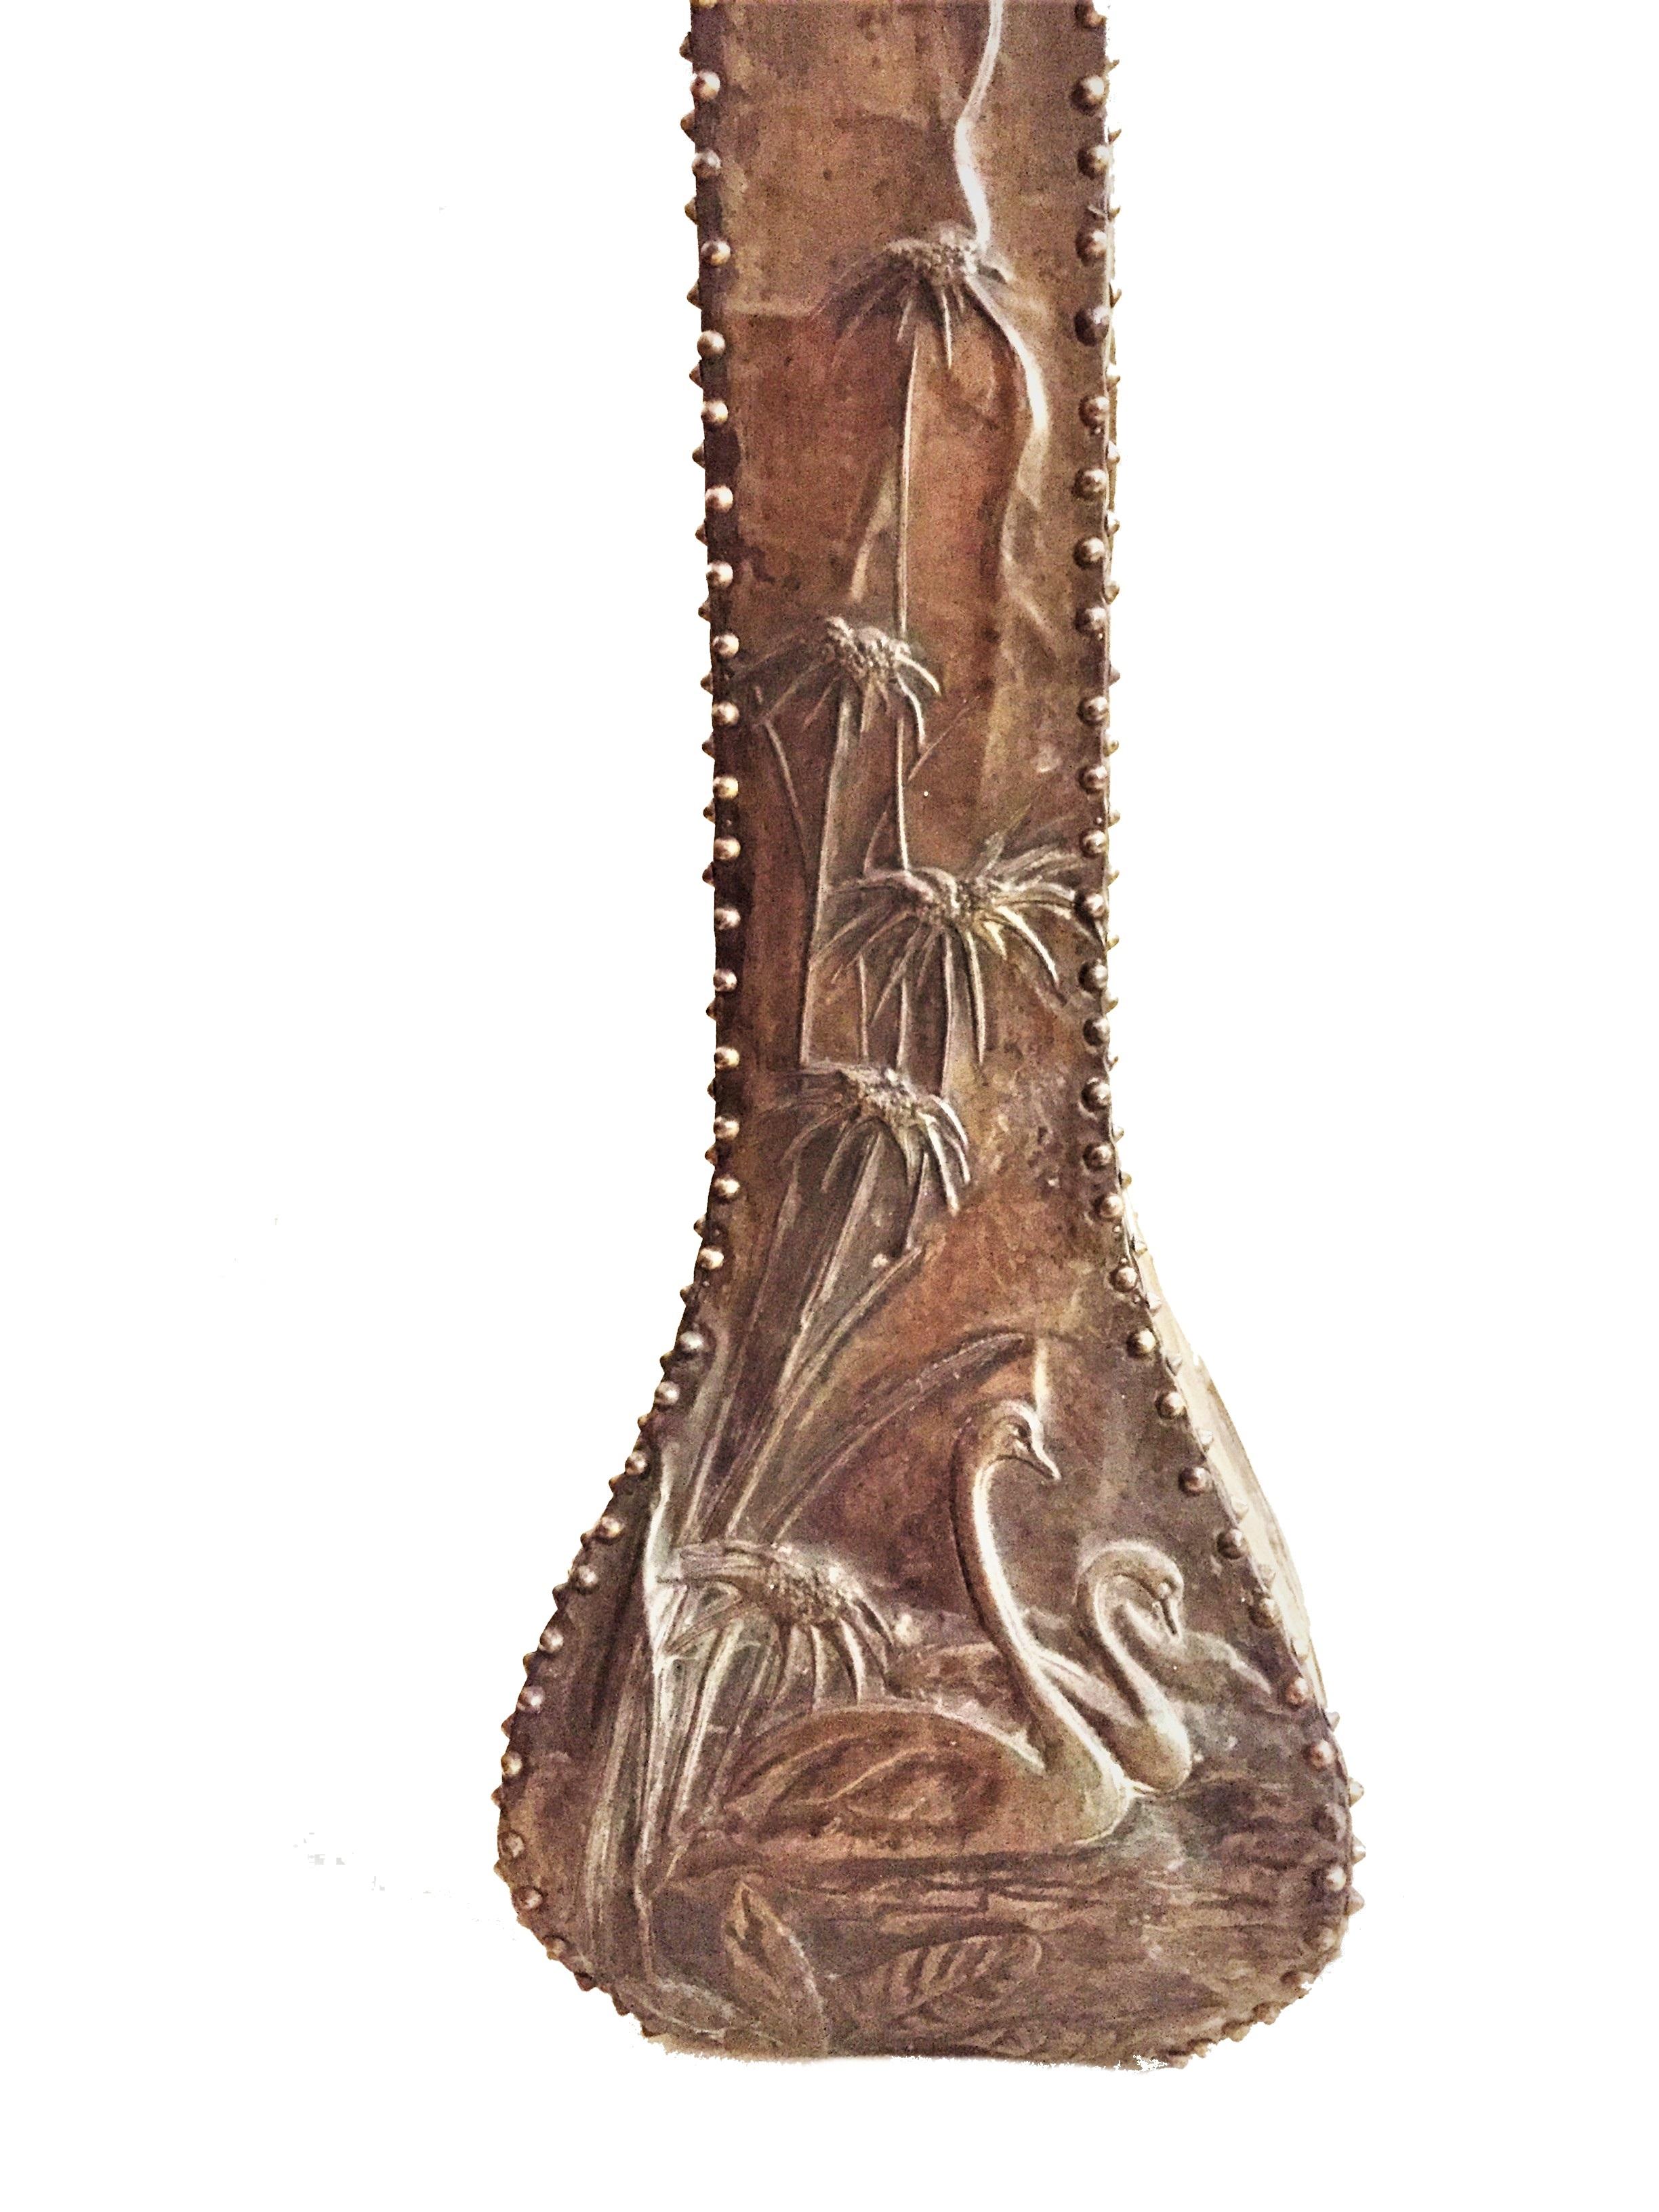 Early 20th Century French Art Nouveau, Hand-Hammered Copper, Wood and Leather Flower Vase For Sale